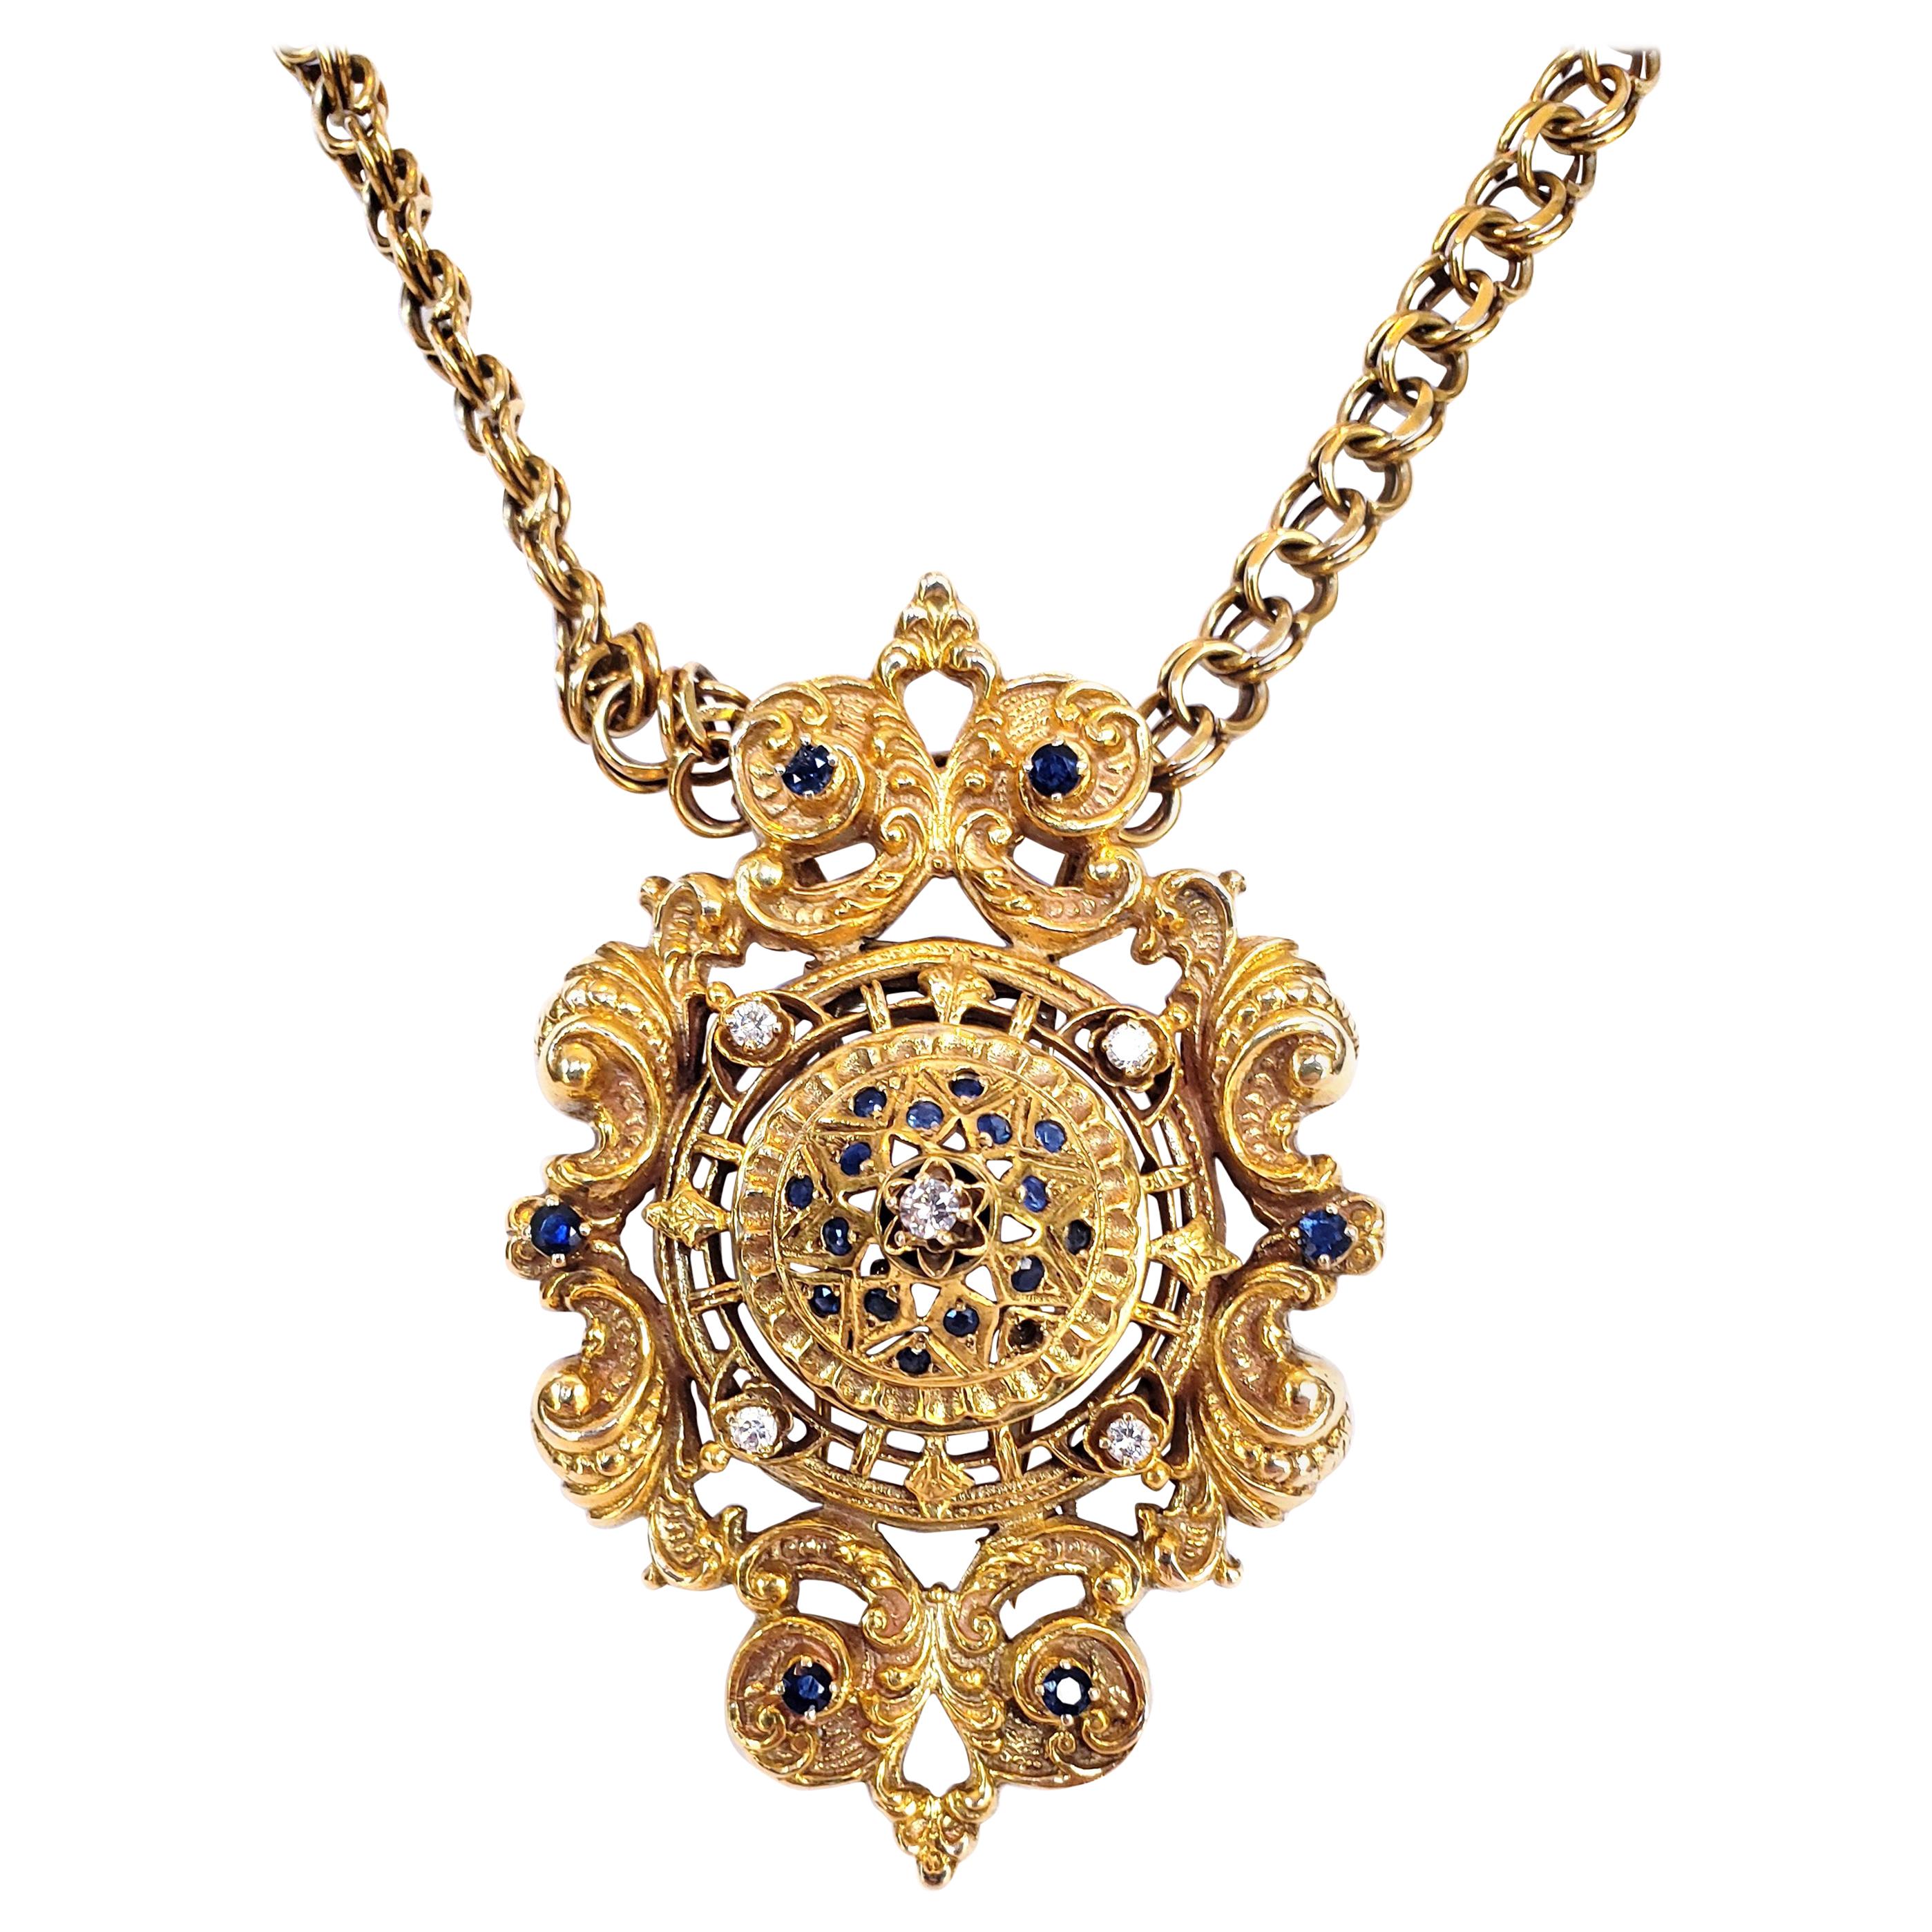 14 Karat Gold Necklace with Highly Stylized Diamond and Sapphire Pendant/Brooch For Sale